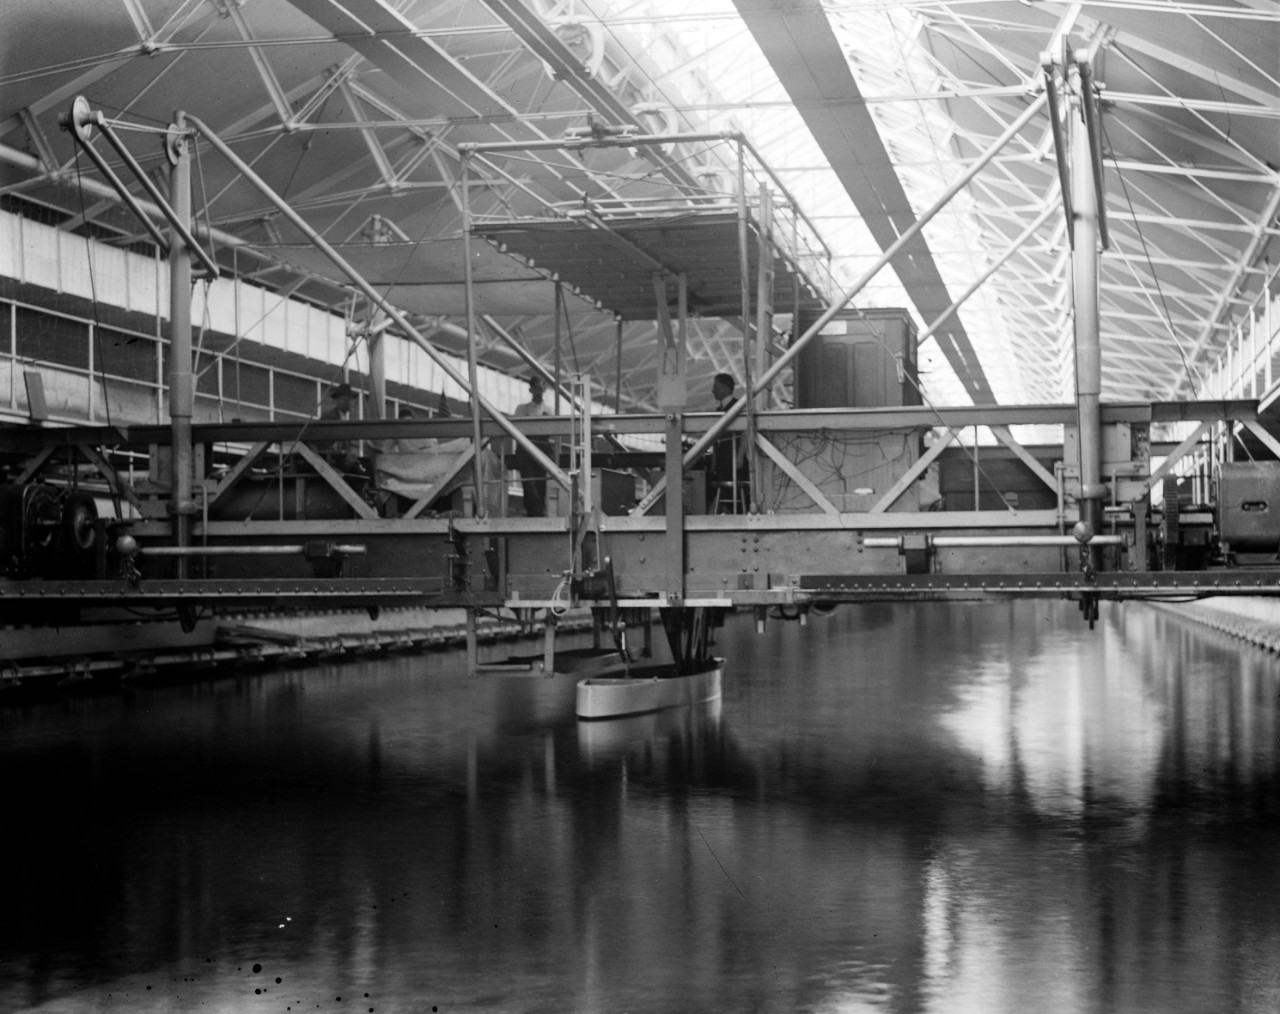 LC-DIG-NPCC-00823:  Experimental Model Basin, Washington Navy Yard, 1918.   Note man on platform.  The Model Basin is now the Cold War Gallery of the National Museum of the U.S. Navy.   Courtesy of the Library of Congress.  